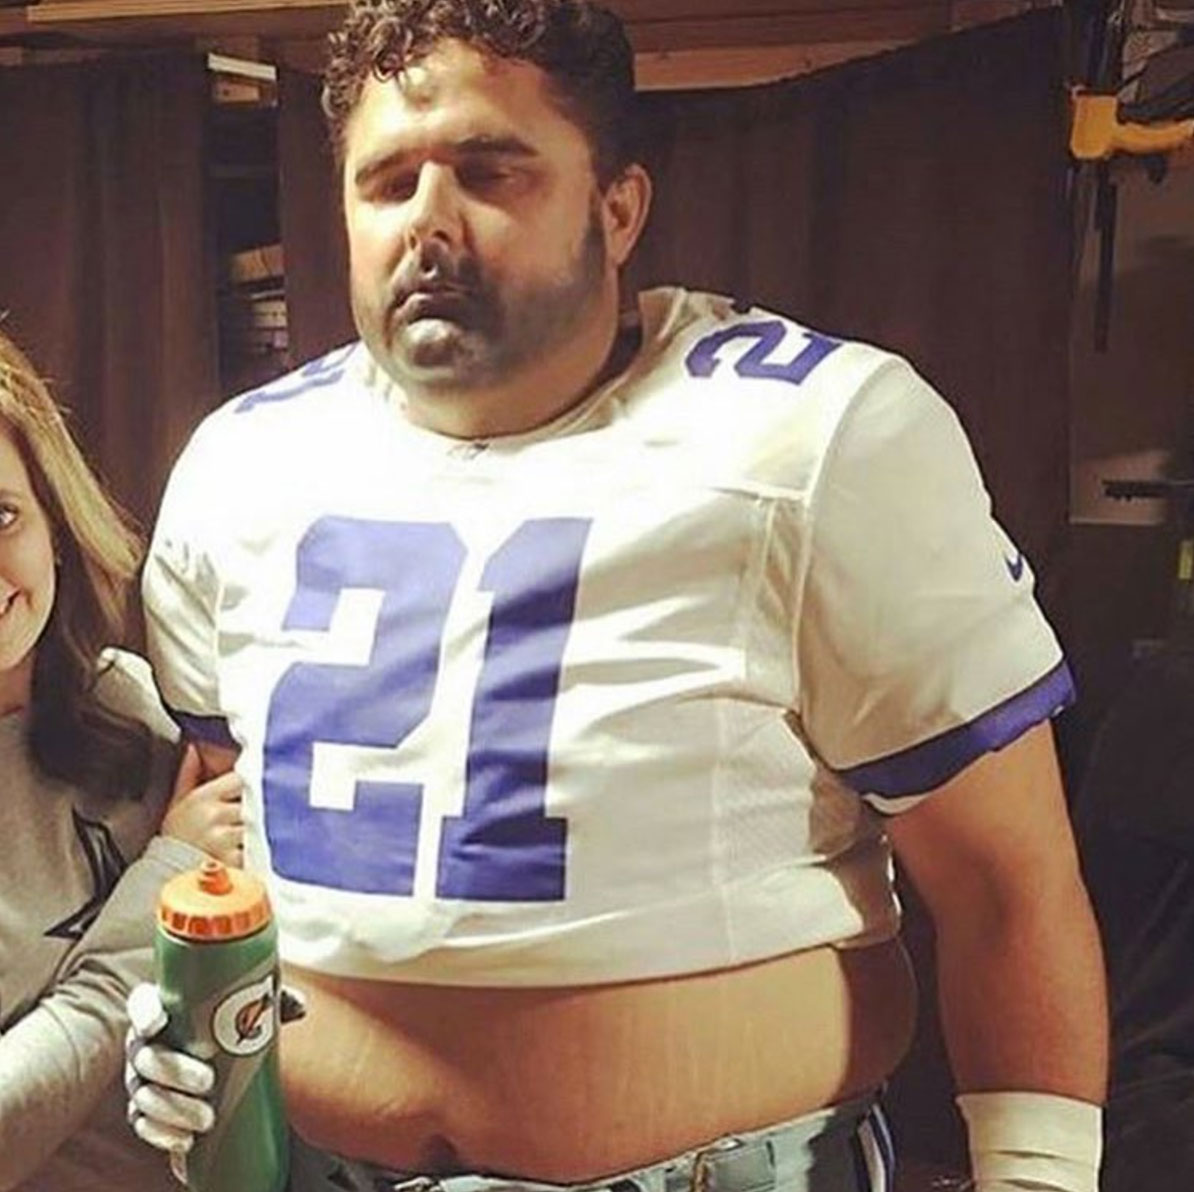 Here Are The Best NFL Themed Halloween Costumes For 2017.